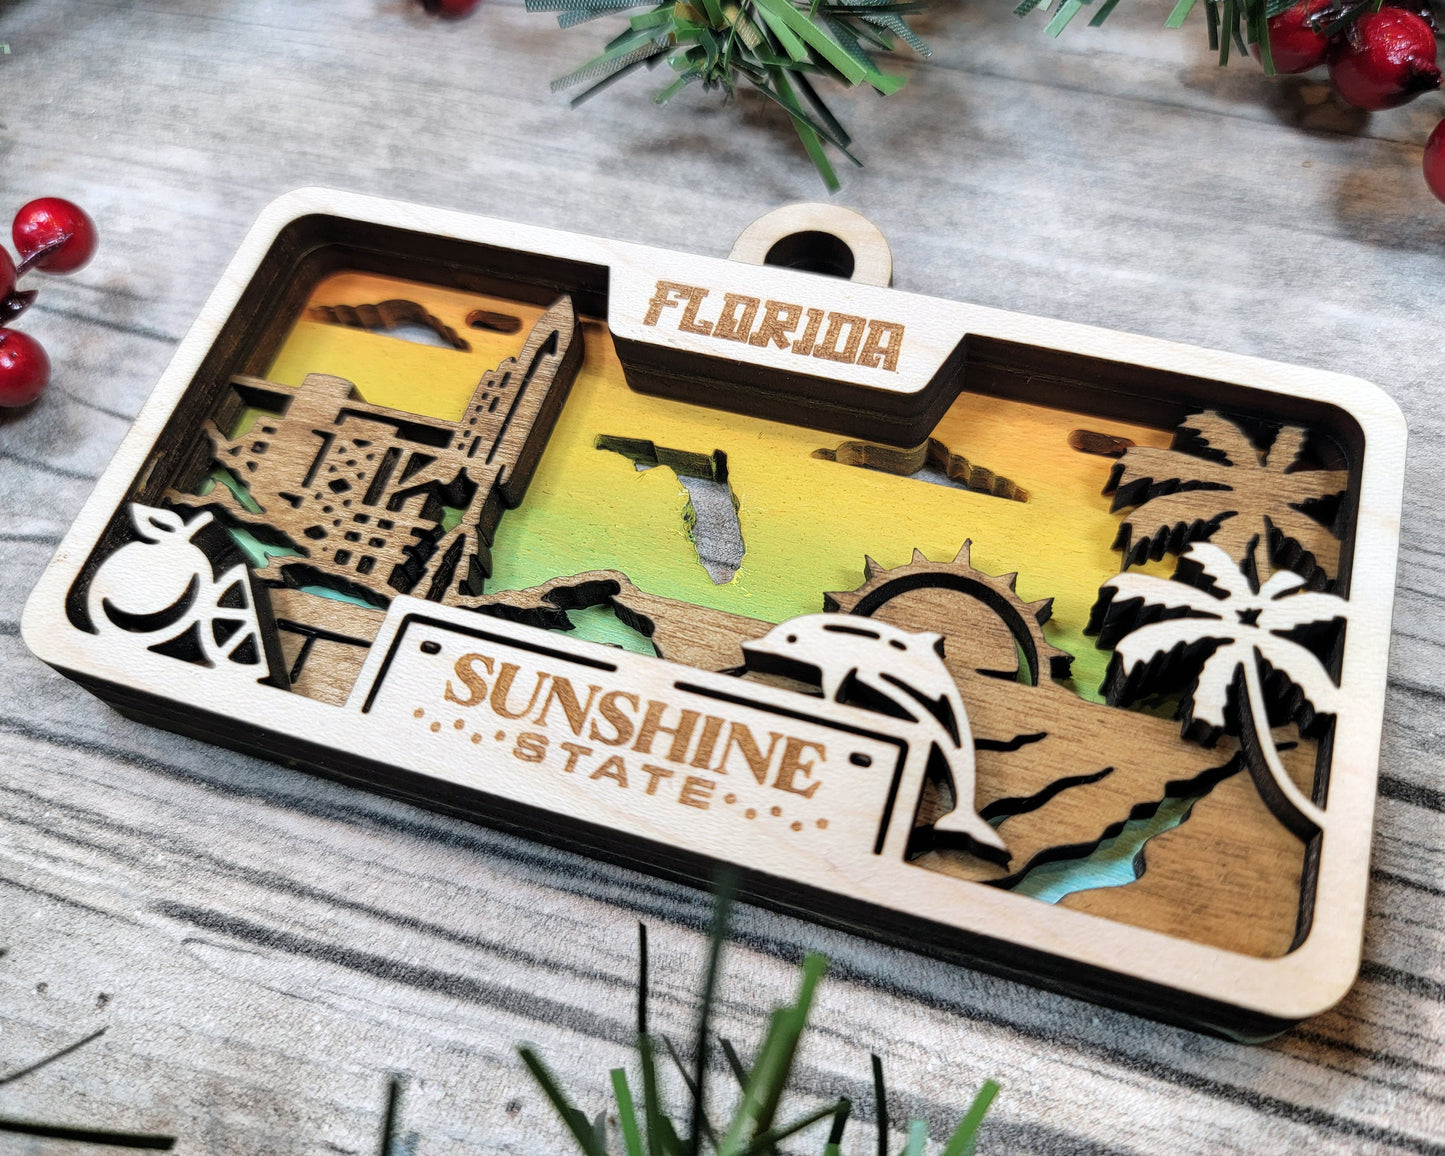 Florida State Plate Ornament and Signage - SVG File Download - Sized for Glowforge - Laser Ready Digital Files